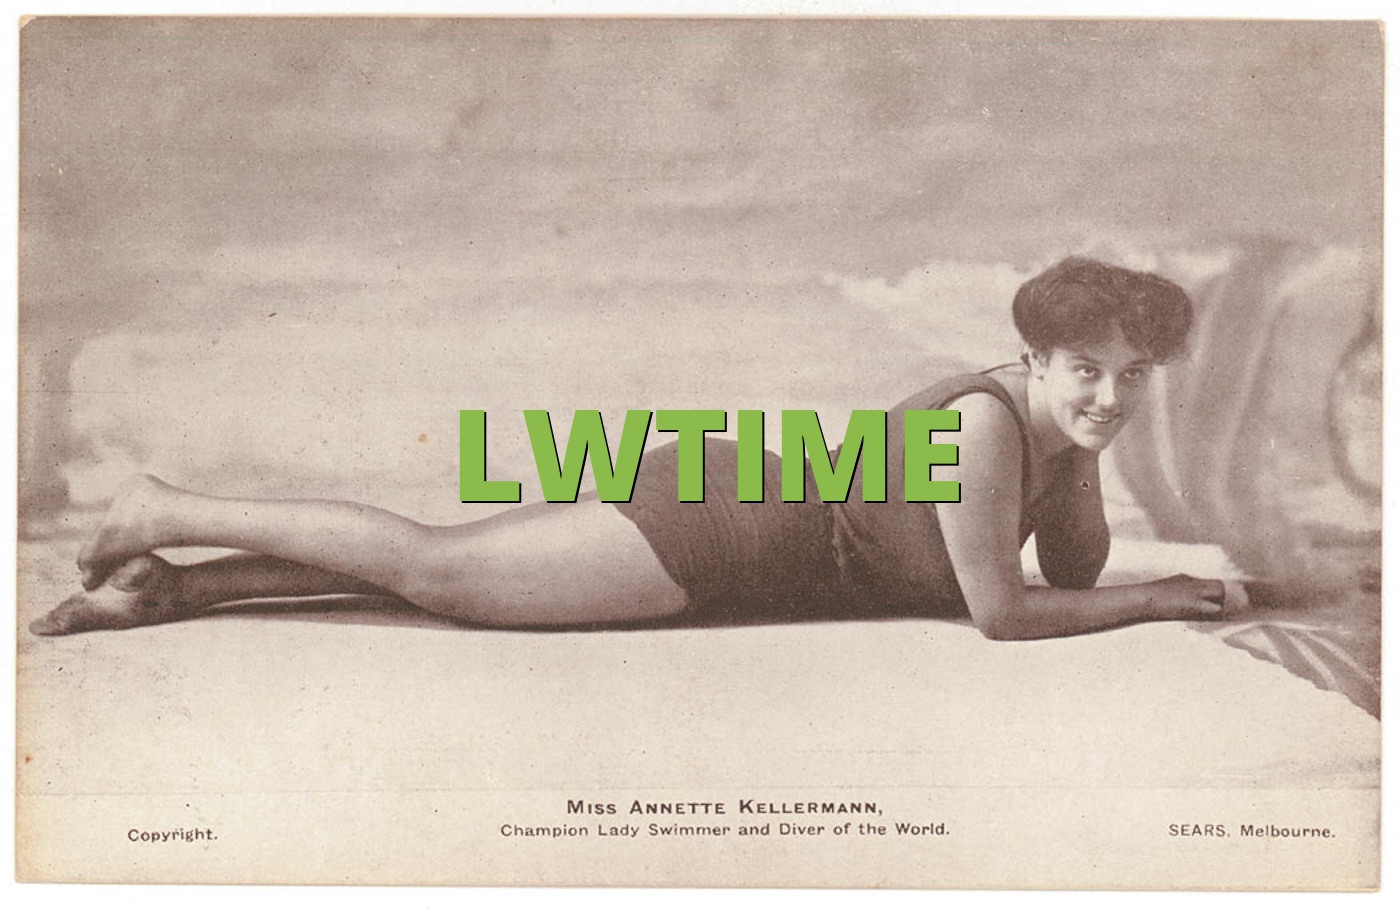 LWTIME